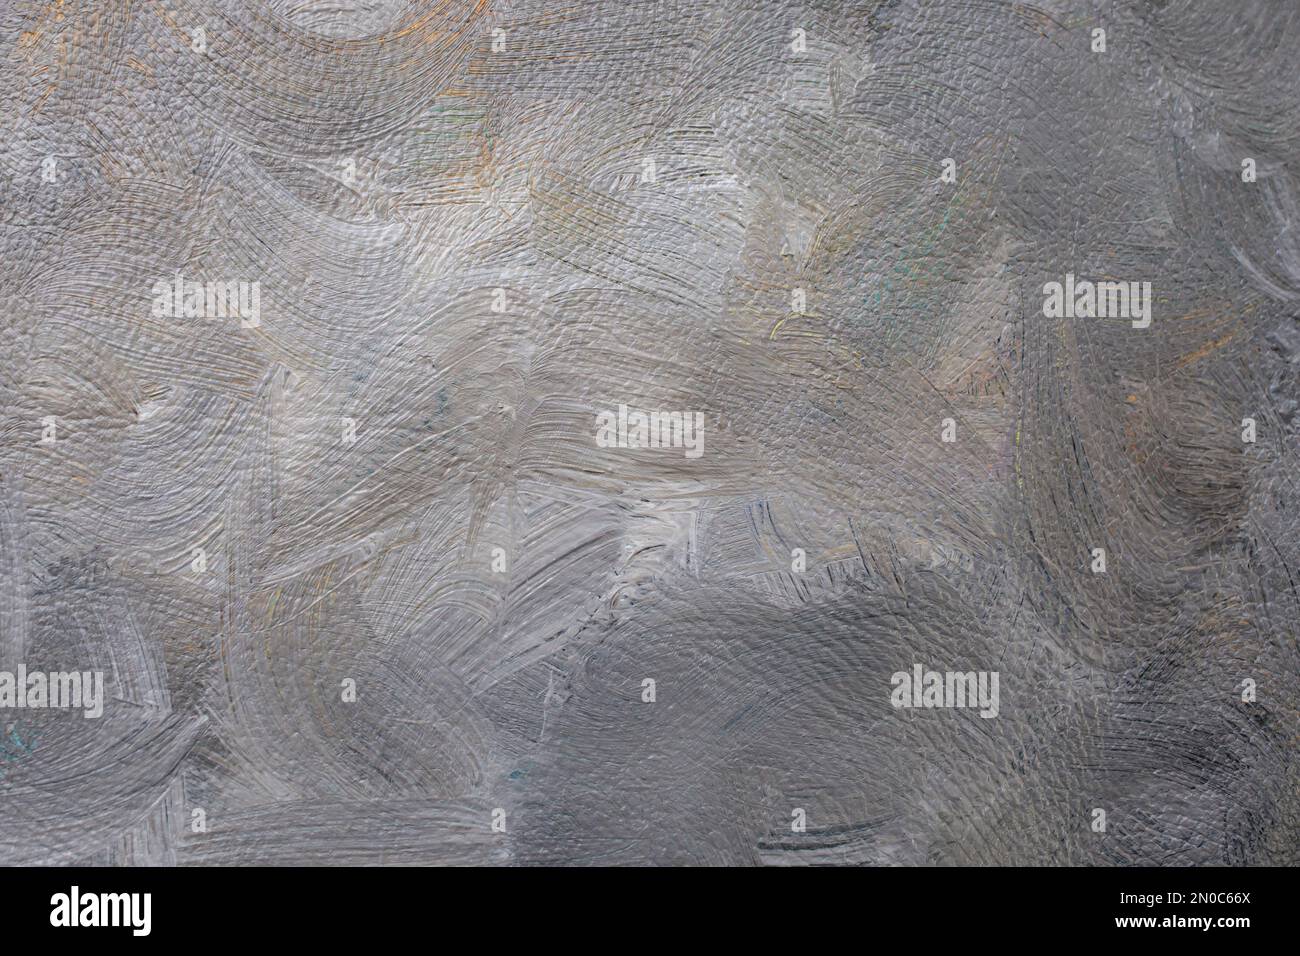 Wavy acrylic paint on leather texture, abstract background Stock Photo